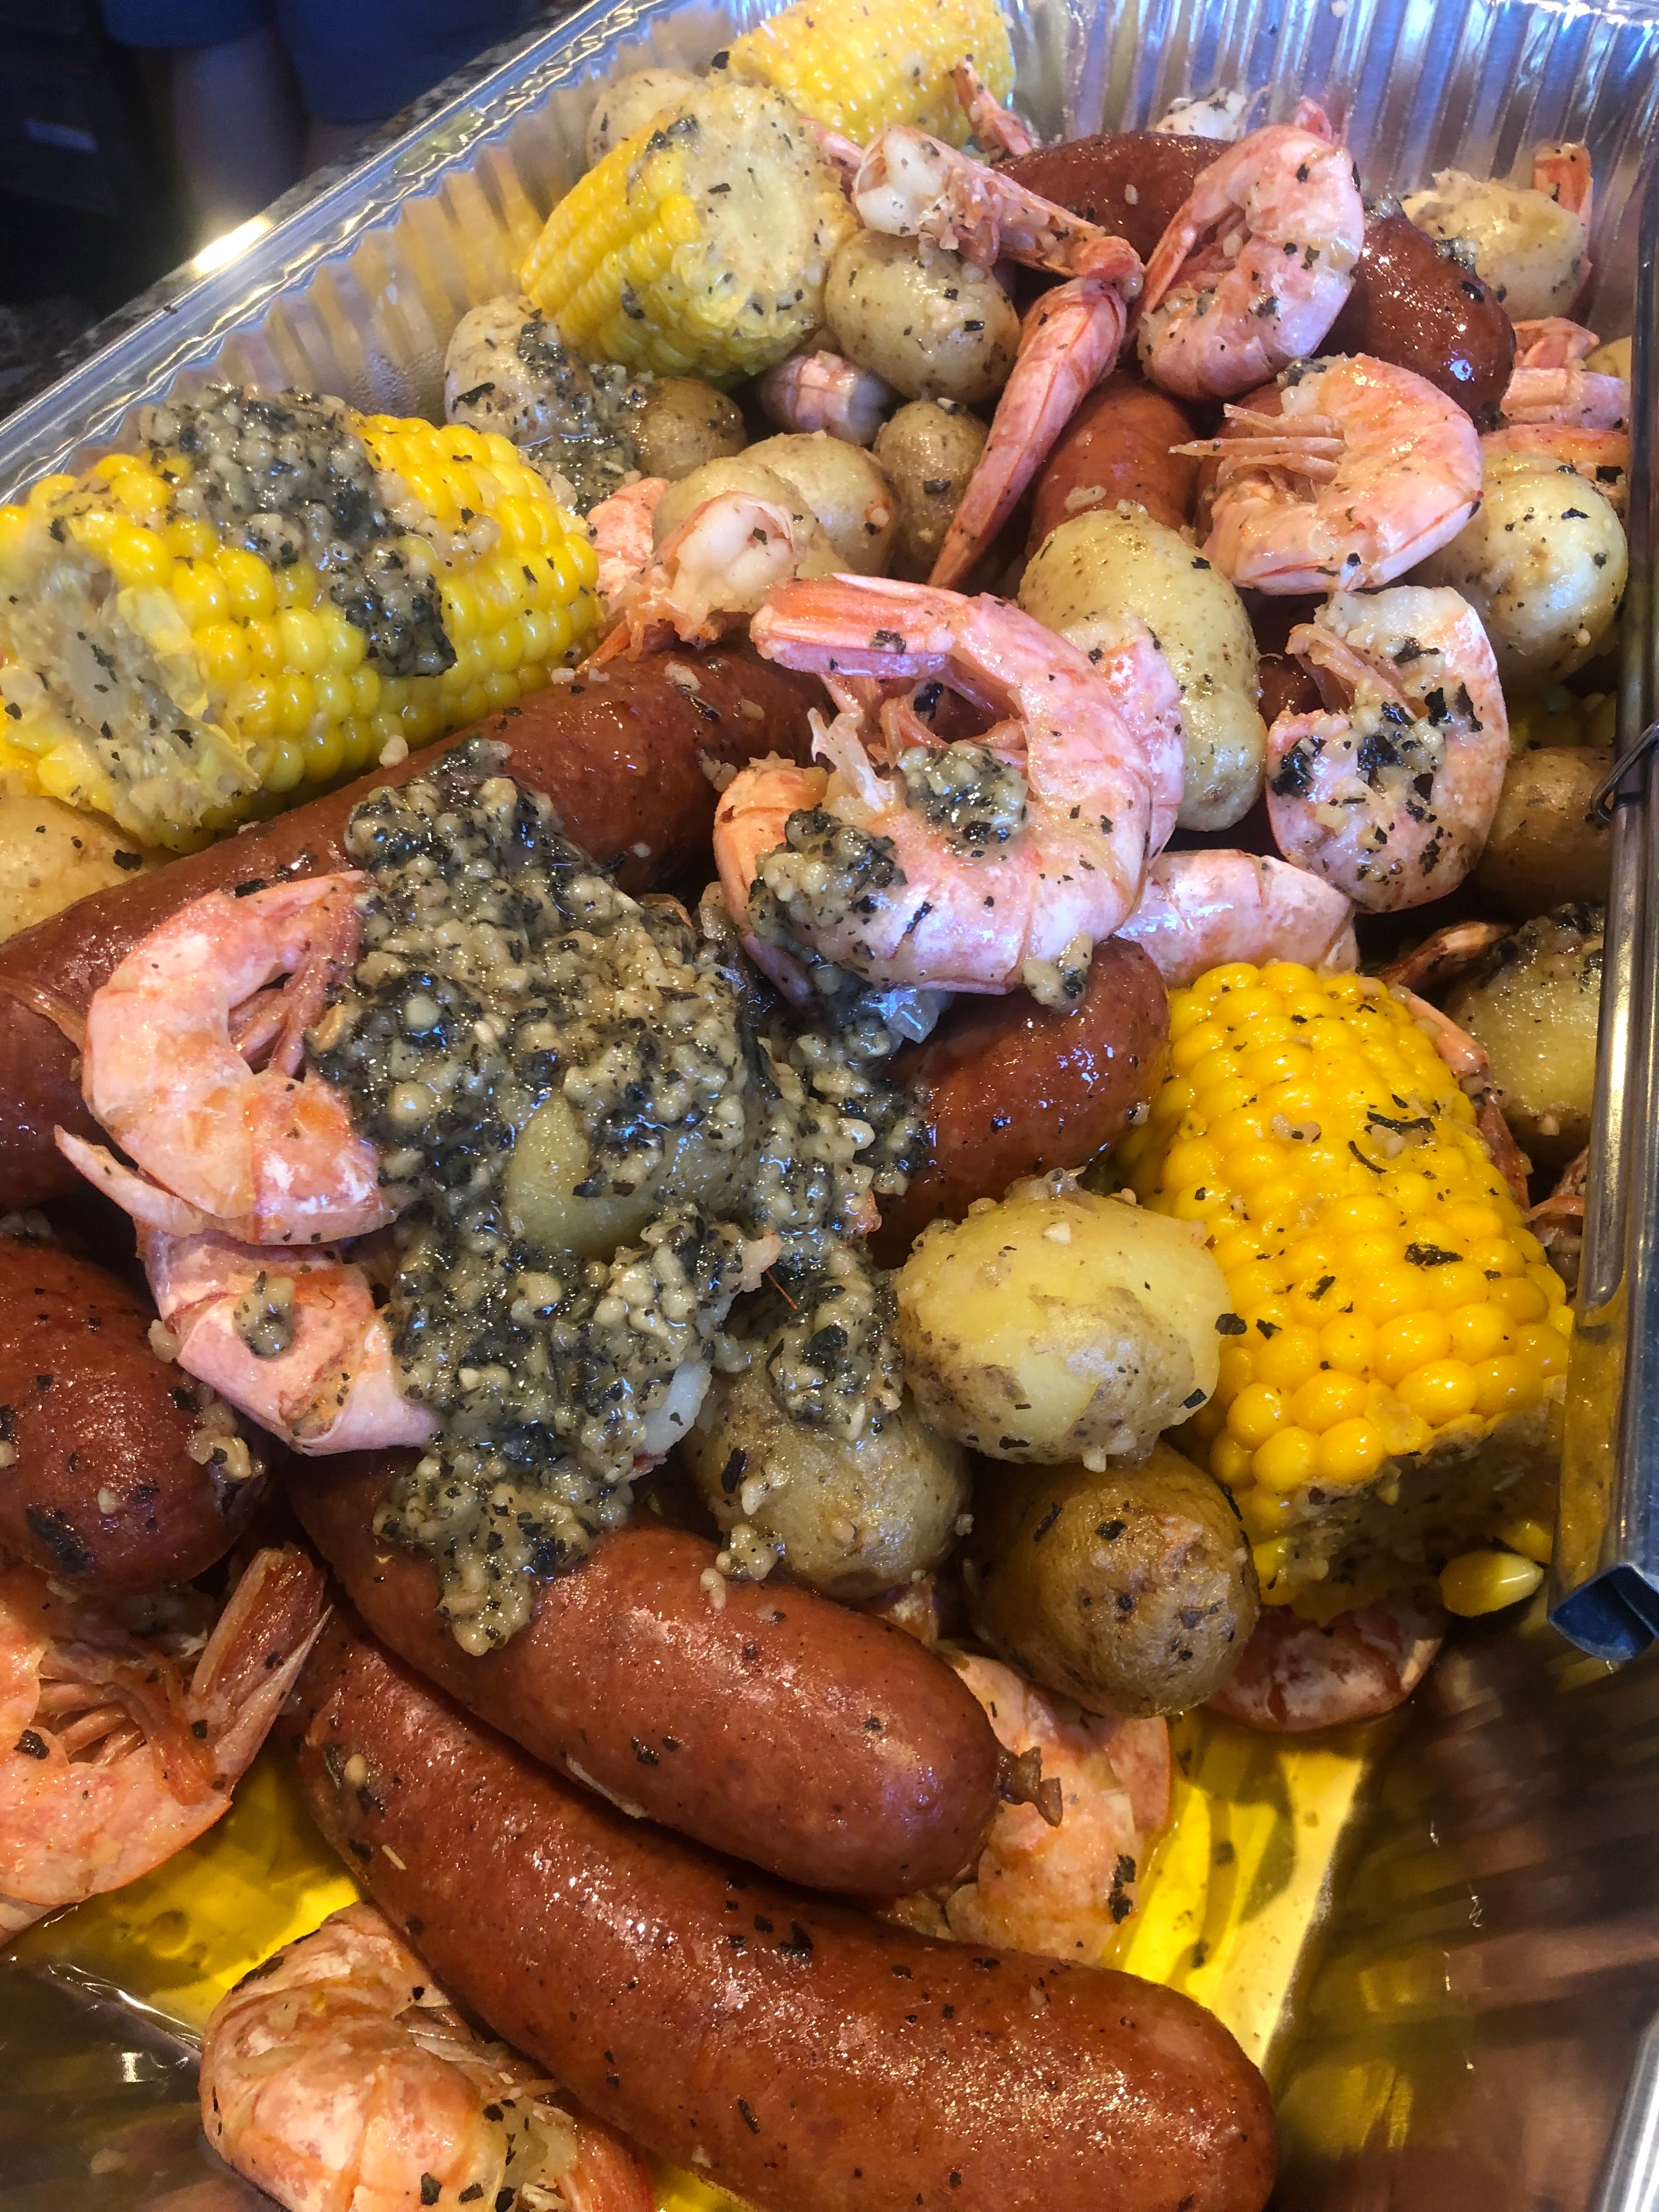 (AUTO SHIP ONLY) 5 Person Shrimpy Magic Seafood Boil Kit